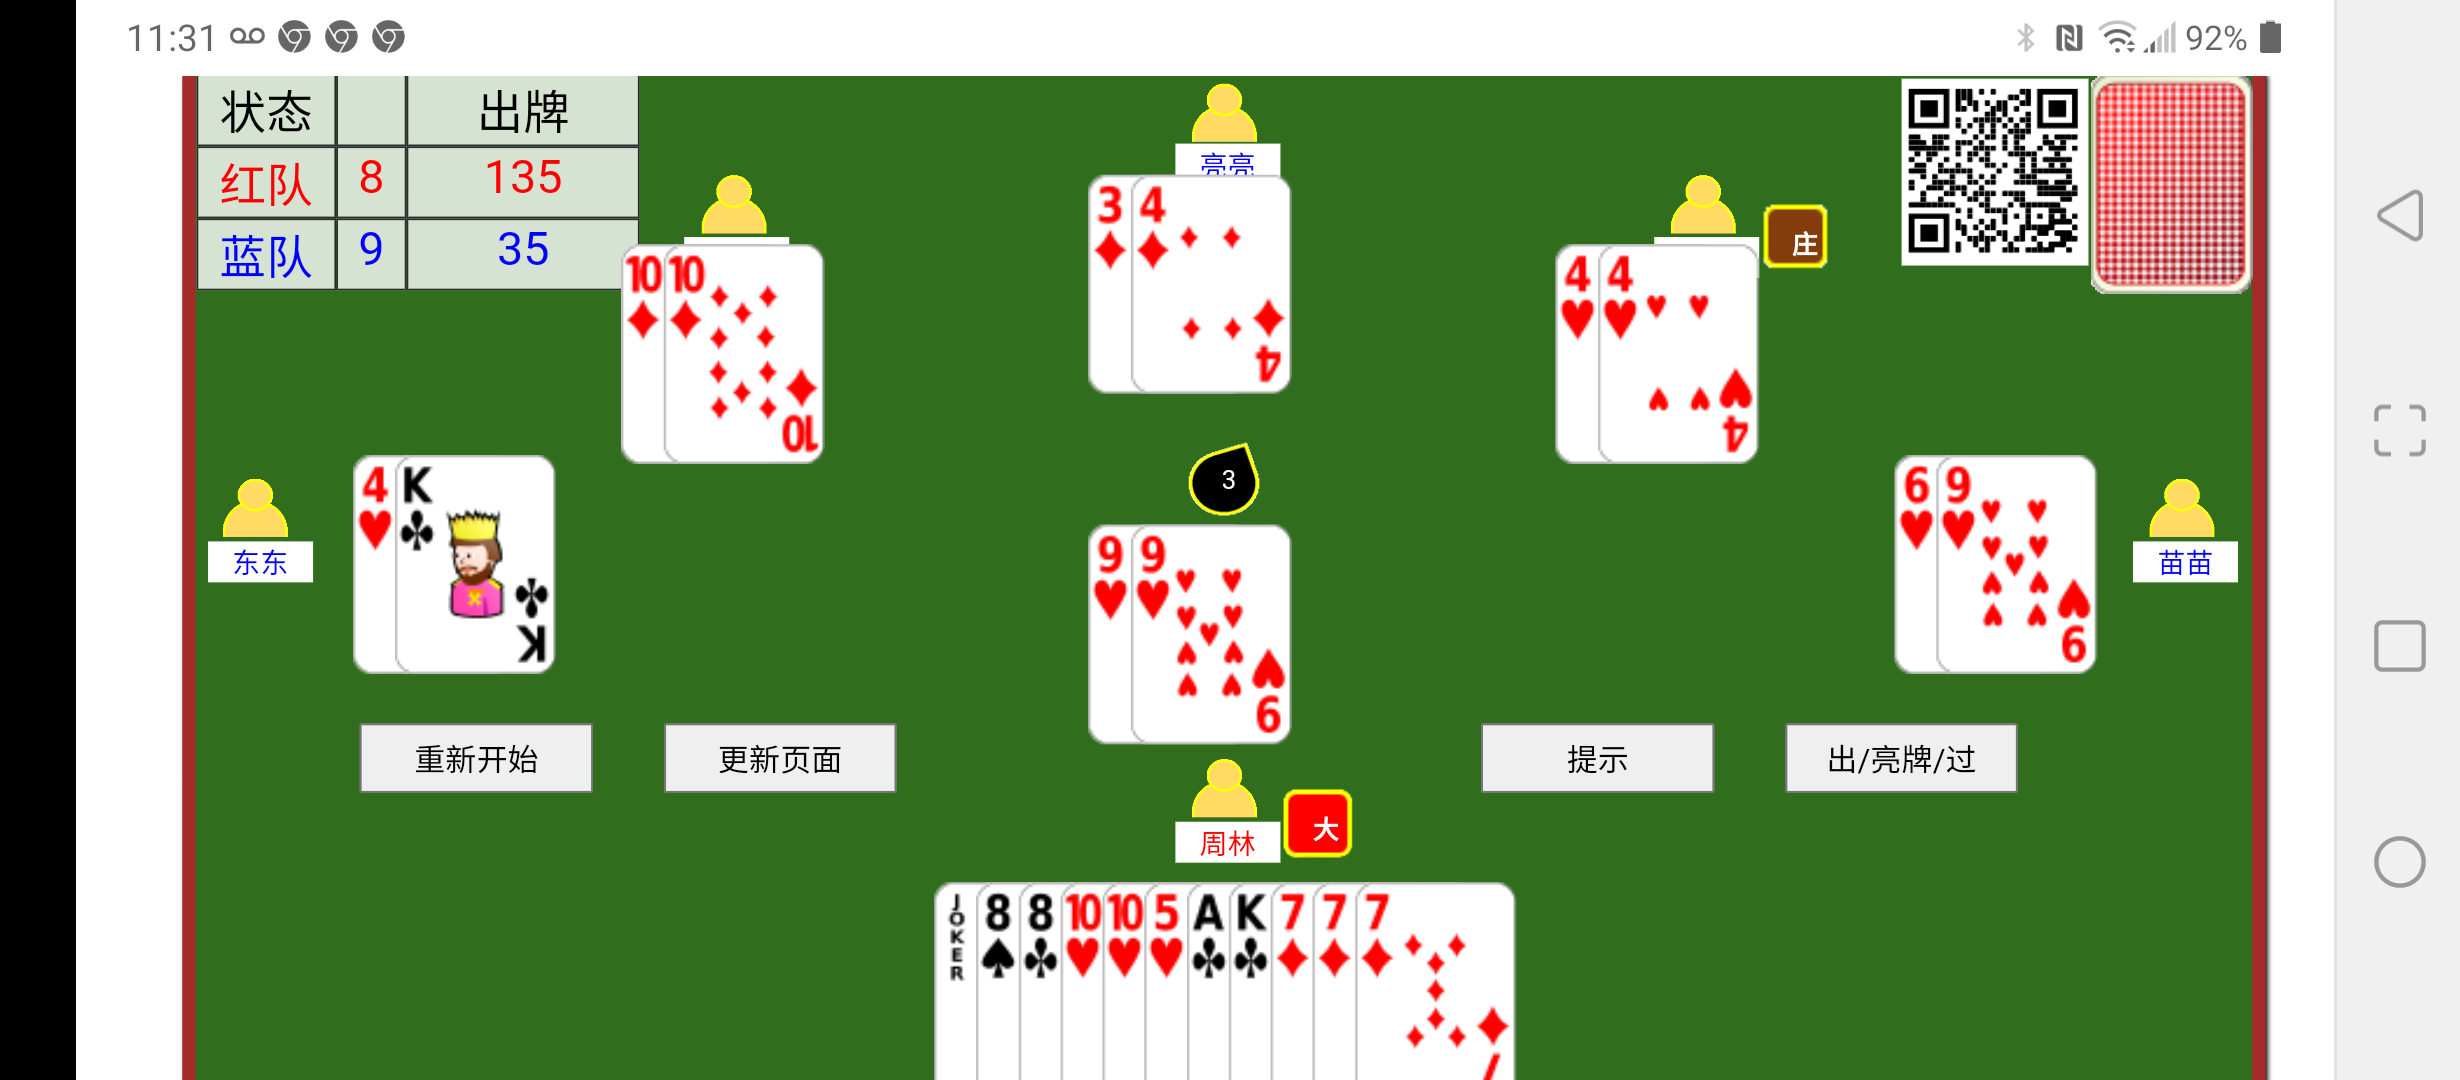 html5 tractor card game Screenshot_20220122-113146.png